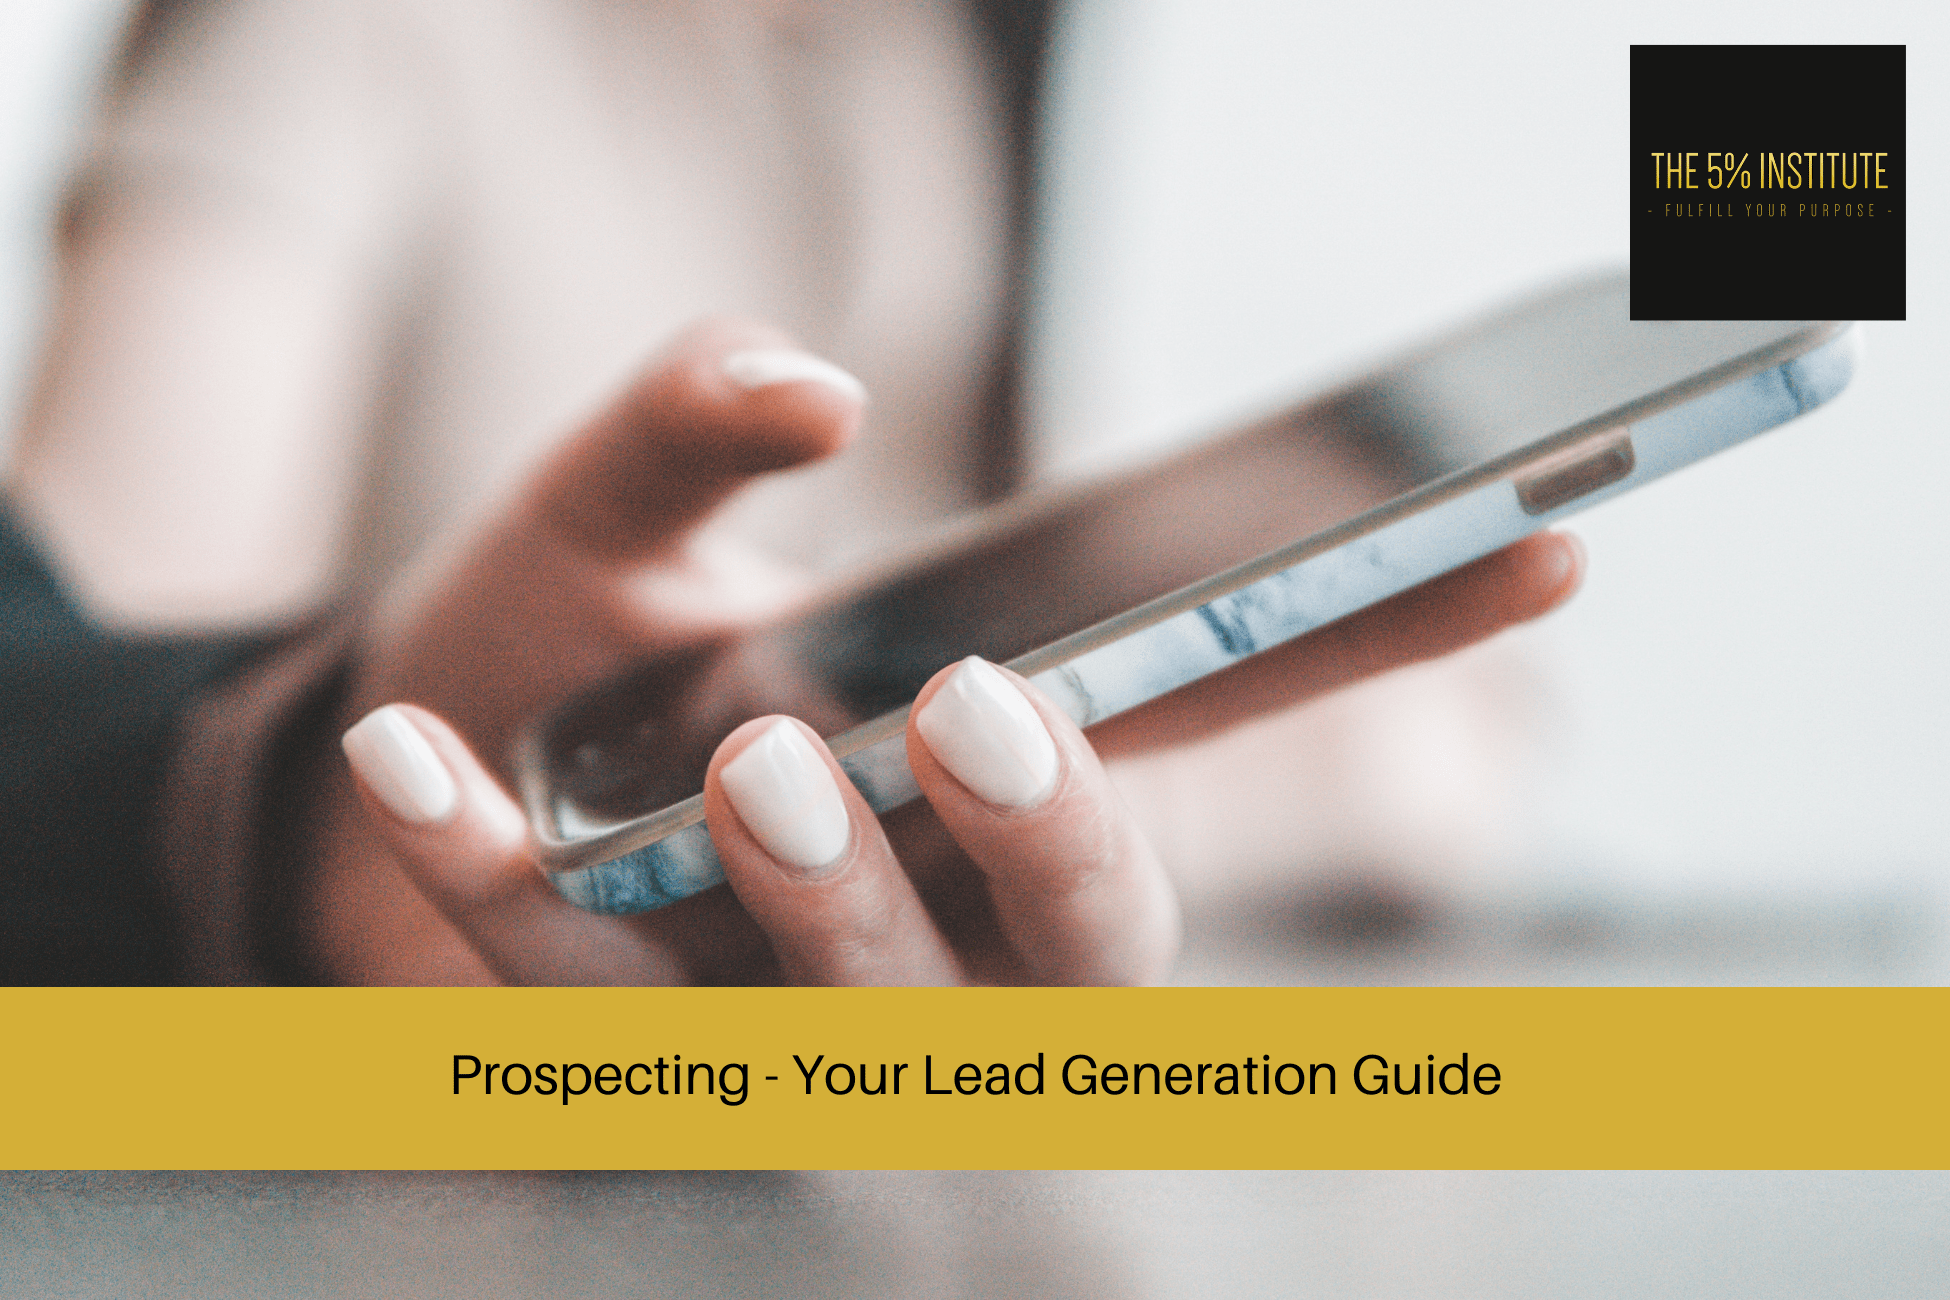 Prospecting - Your Lead Generation Guide